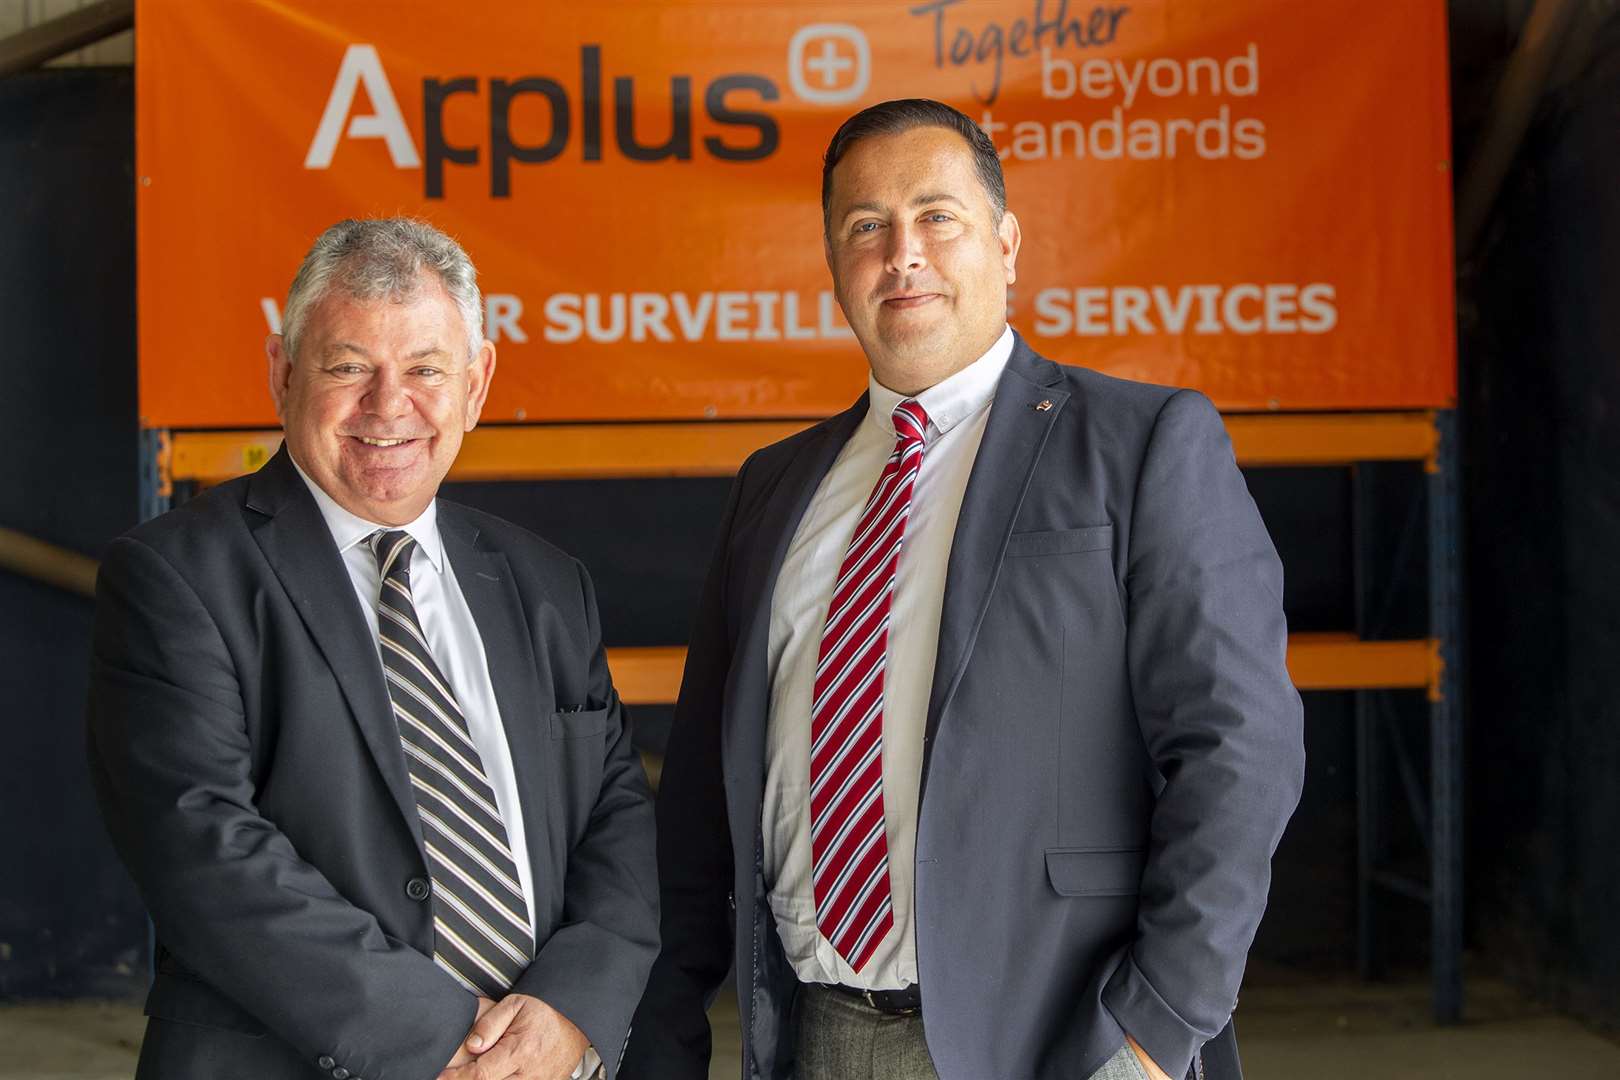 Tommy Hillock (left) General Manager and Darren Ghazaleh (right) Managing Director at the Applus+ UK open day.